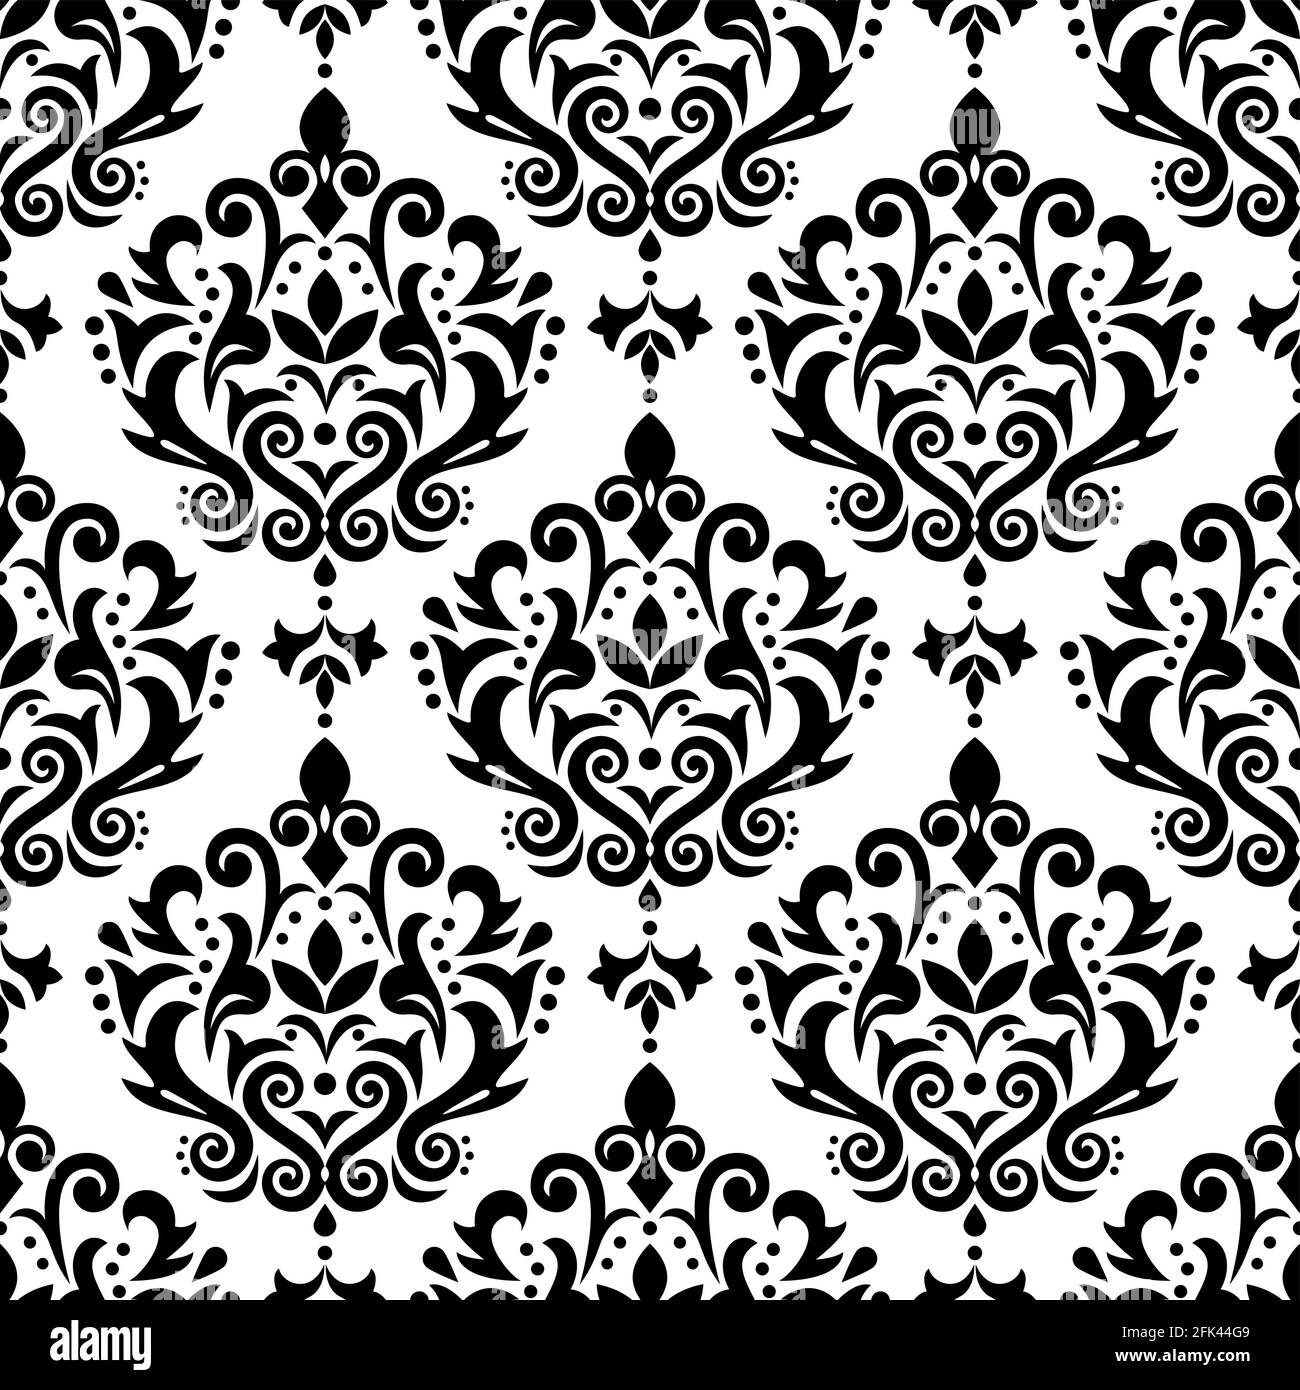 Damask elegant vector seamless pattern, victorian textile or fabric print design with flowers, swirls and leaves in black and white Stock Vector